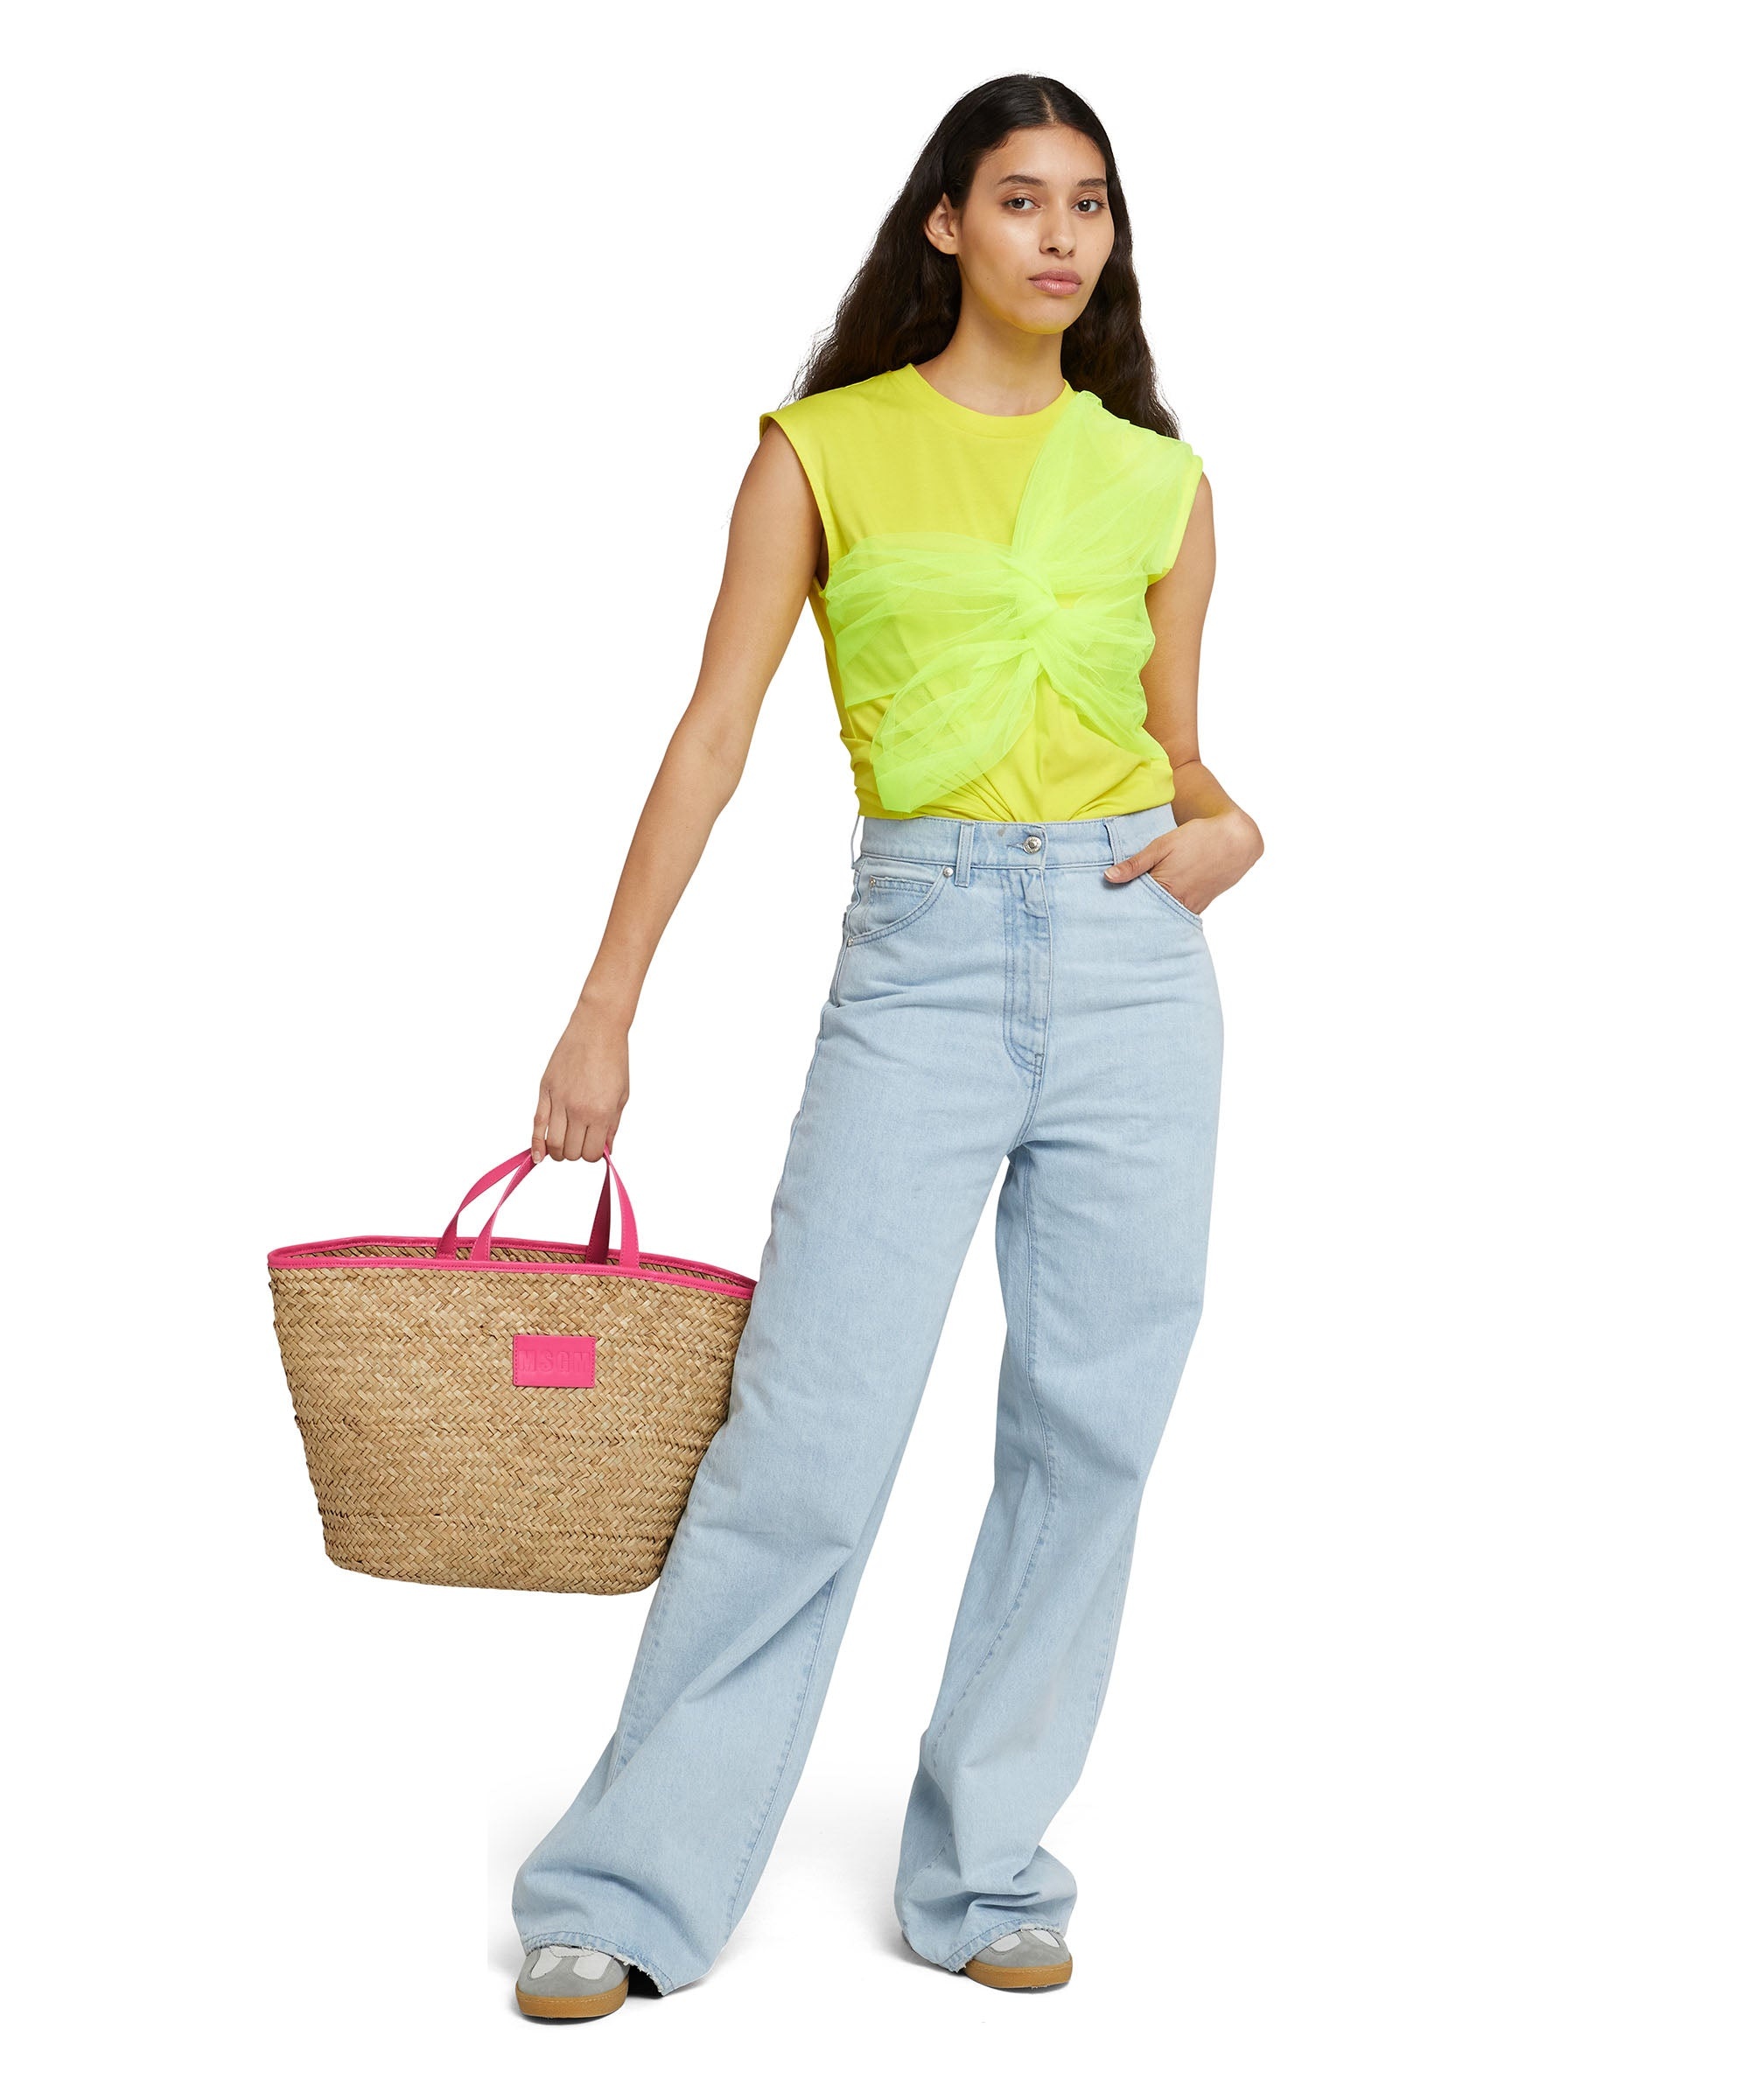 Large straw tote bag with accomanying mini pouch - 5